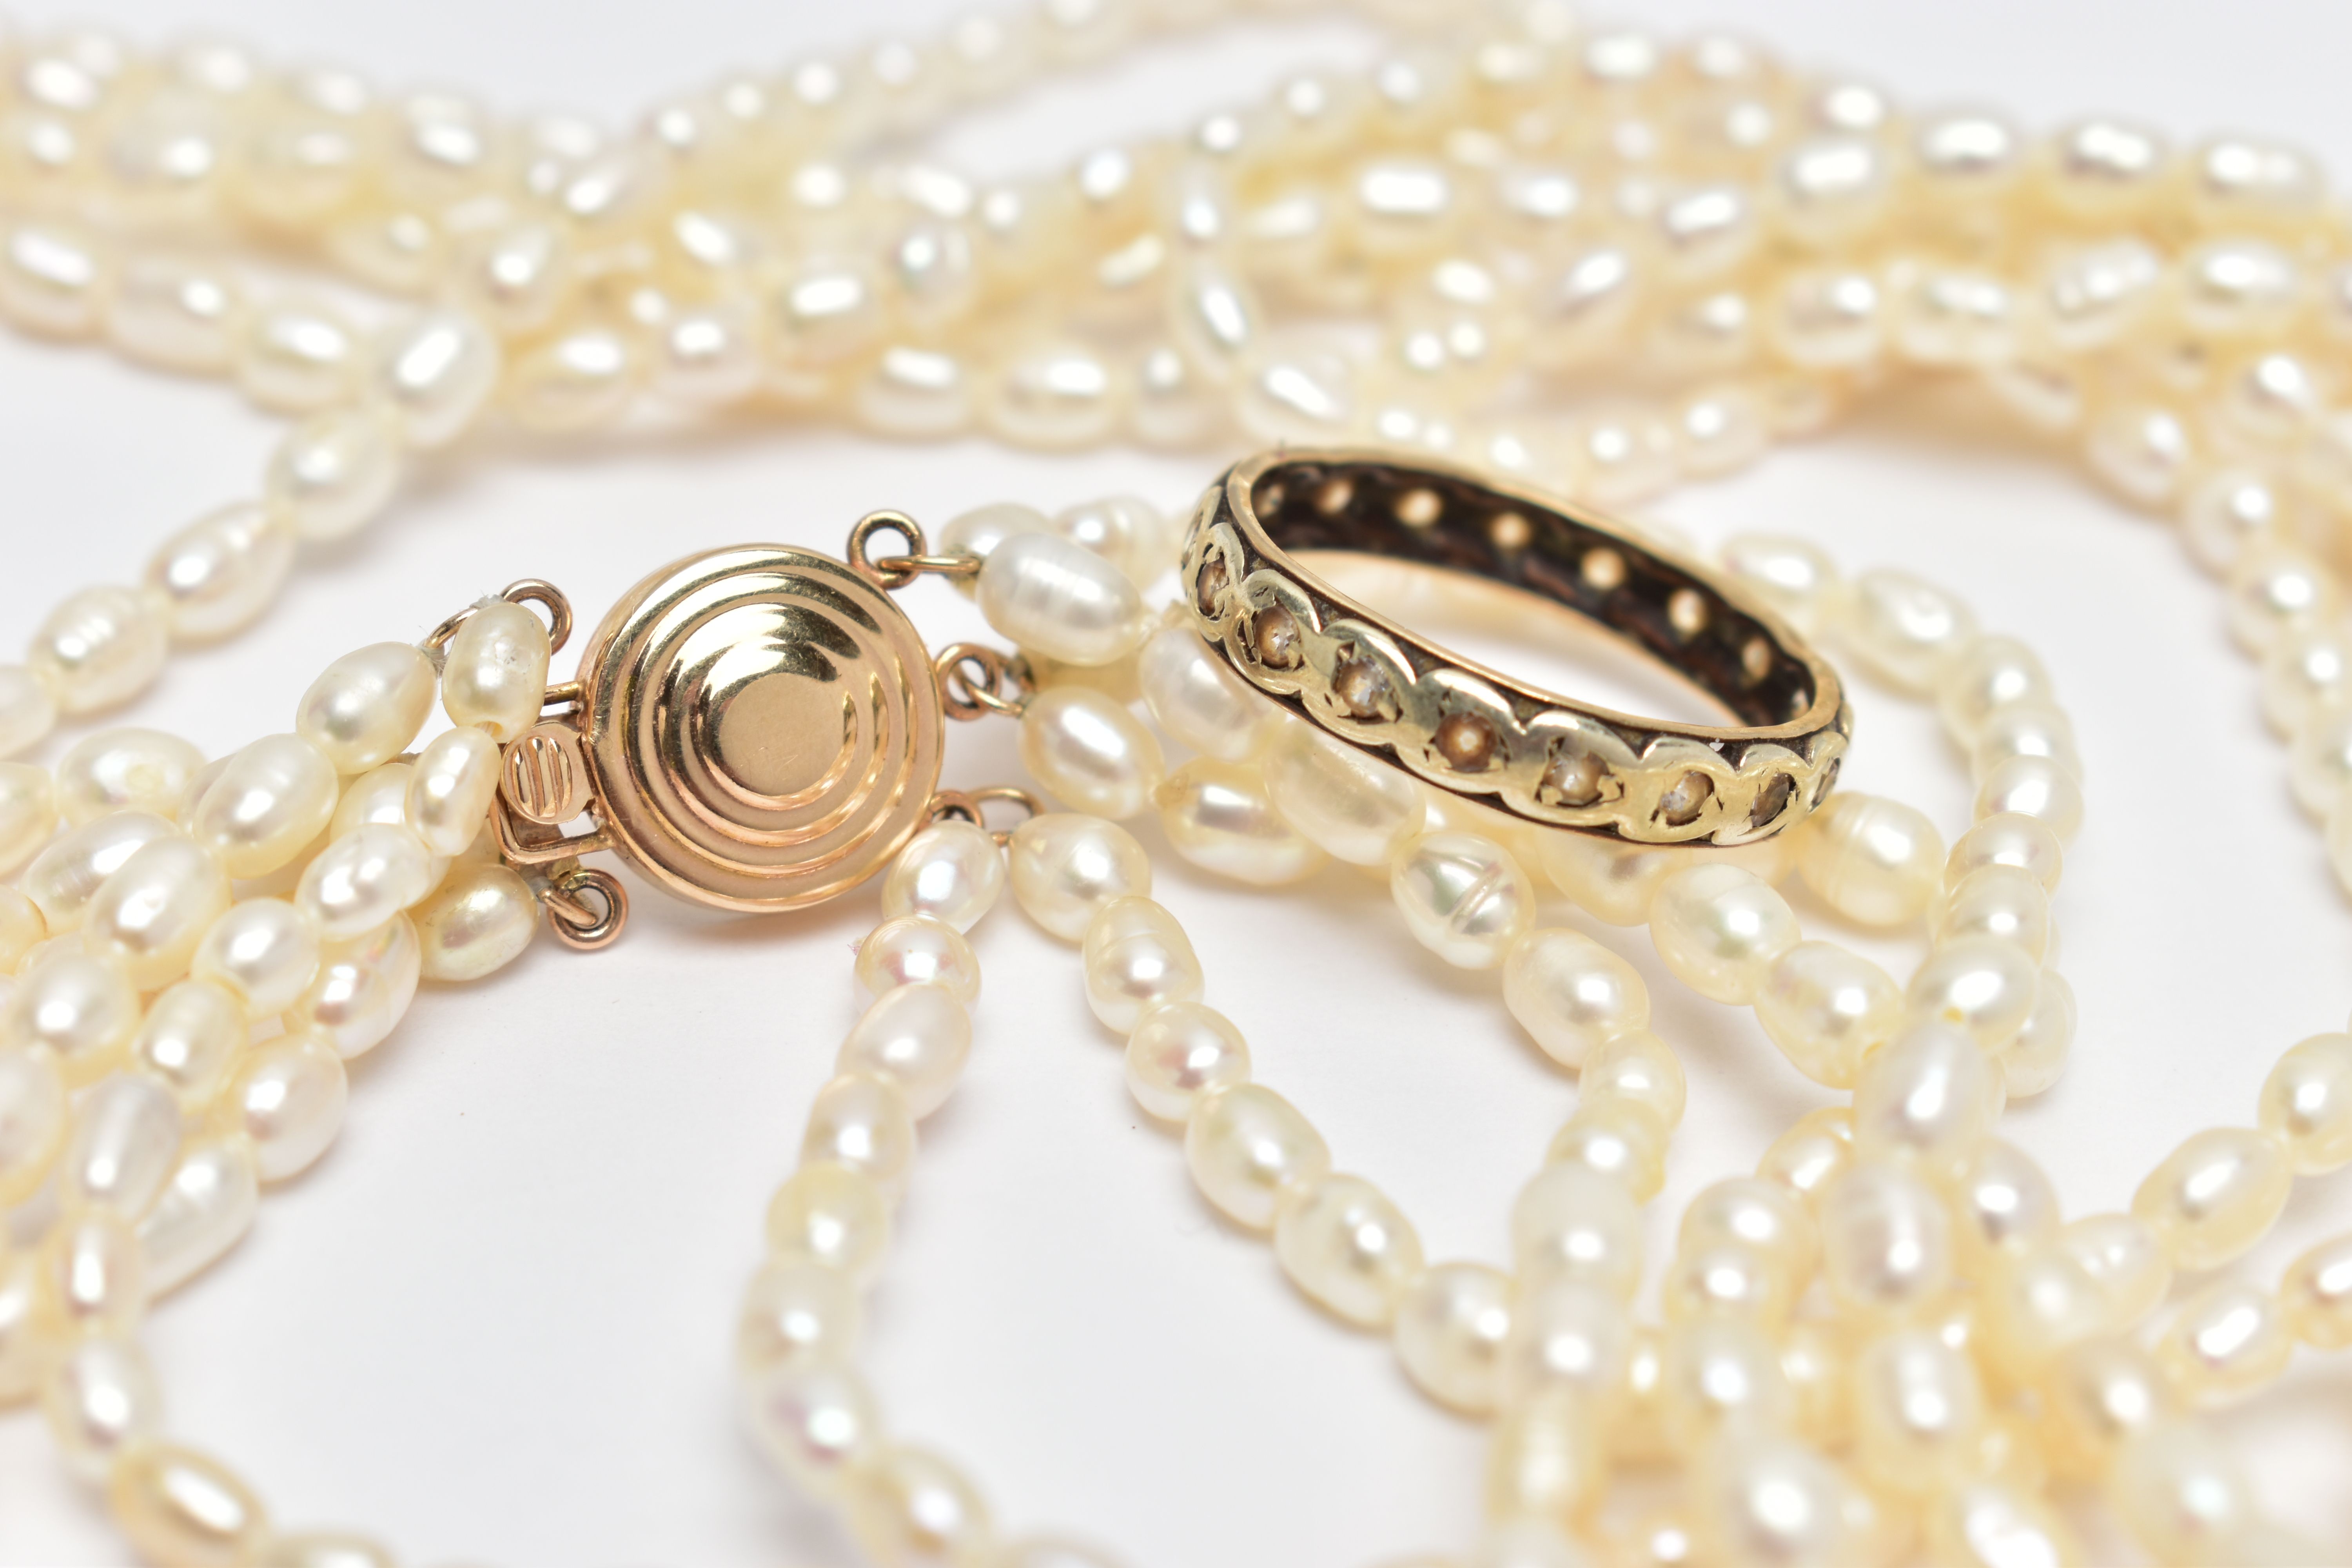 A YELLOW METAL FULL ETERNITY RING AND A CULTURED PEARL NECKLACE, worn yellow metal full eternity - Image 5 of 5